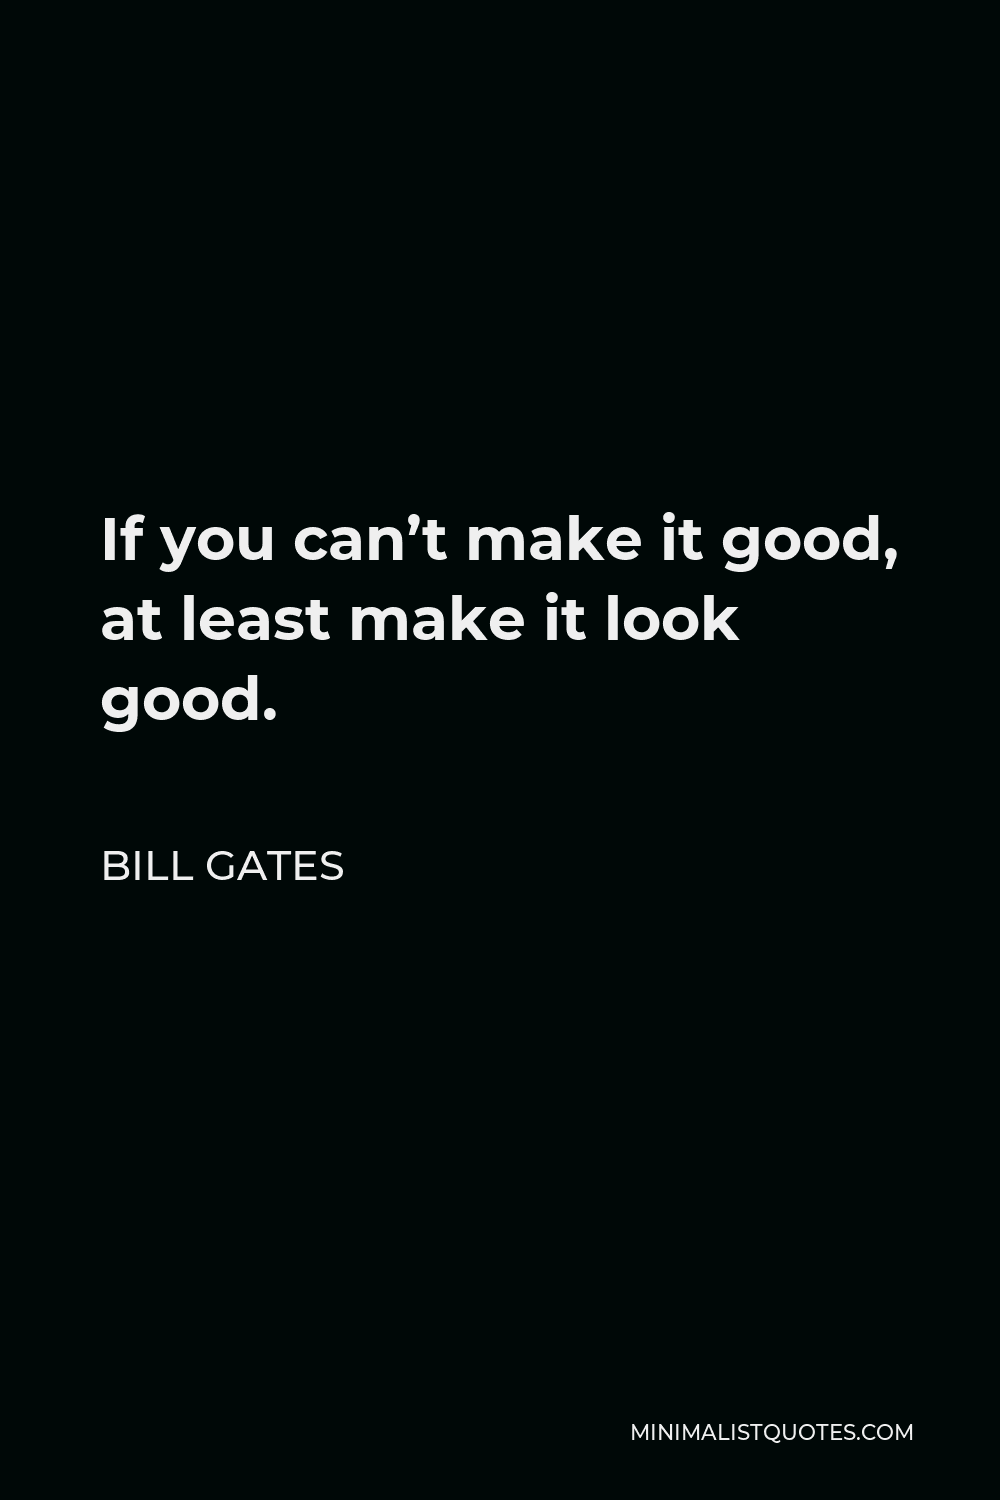 Bill Gates Quote - If you can’t make it good, at least make it look good.